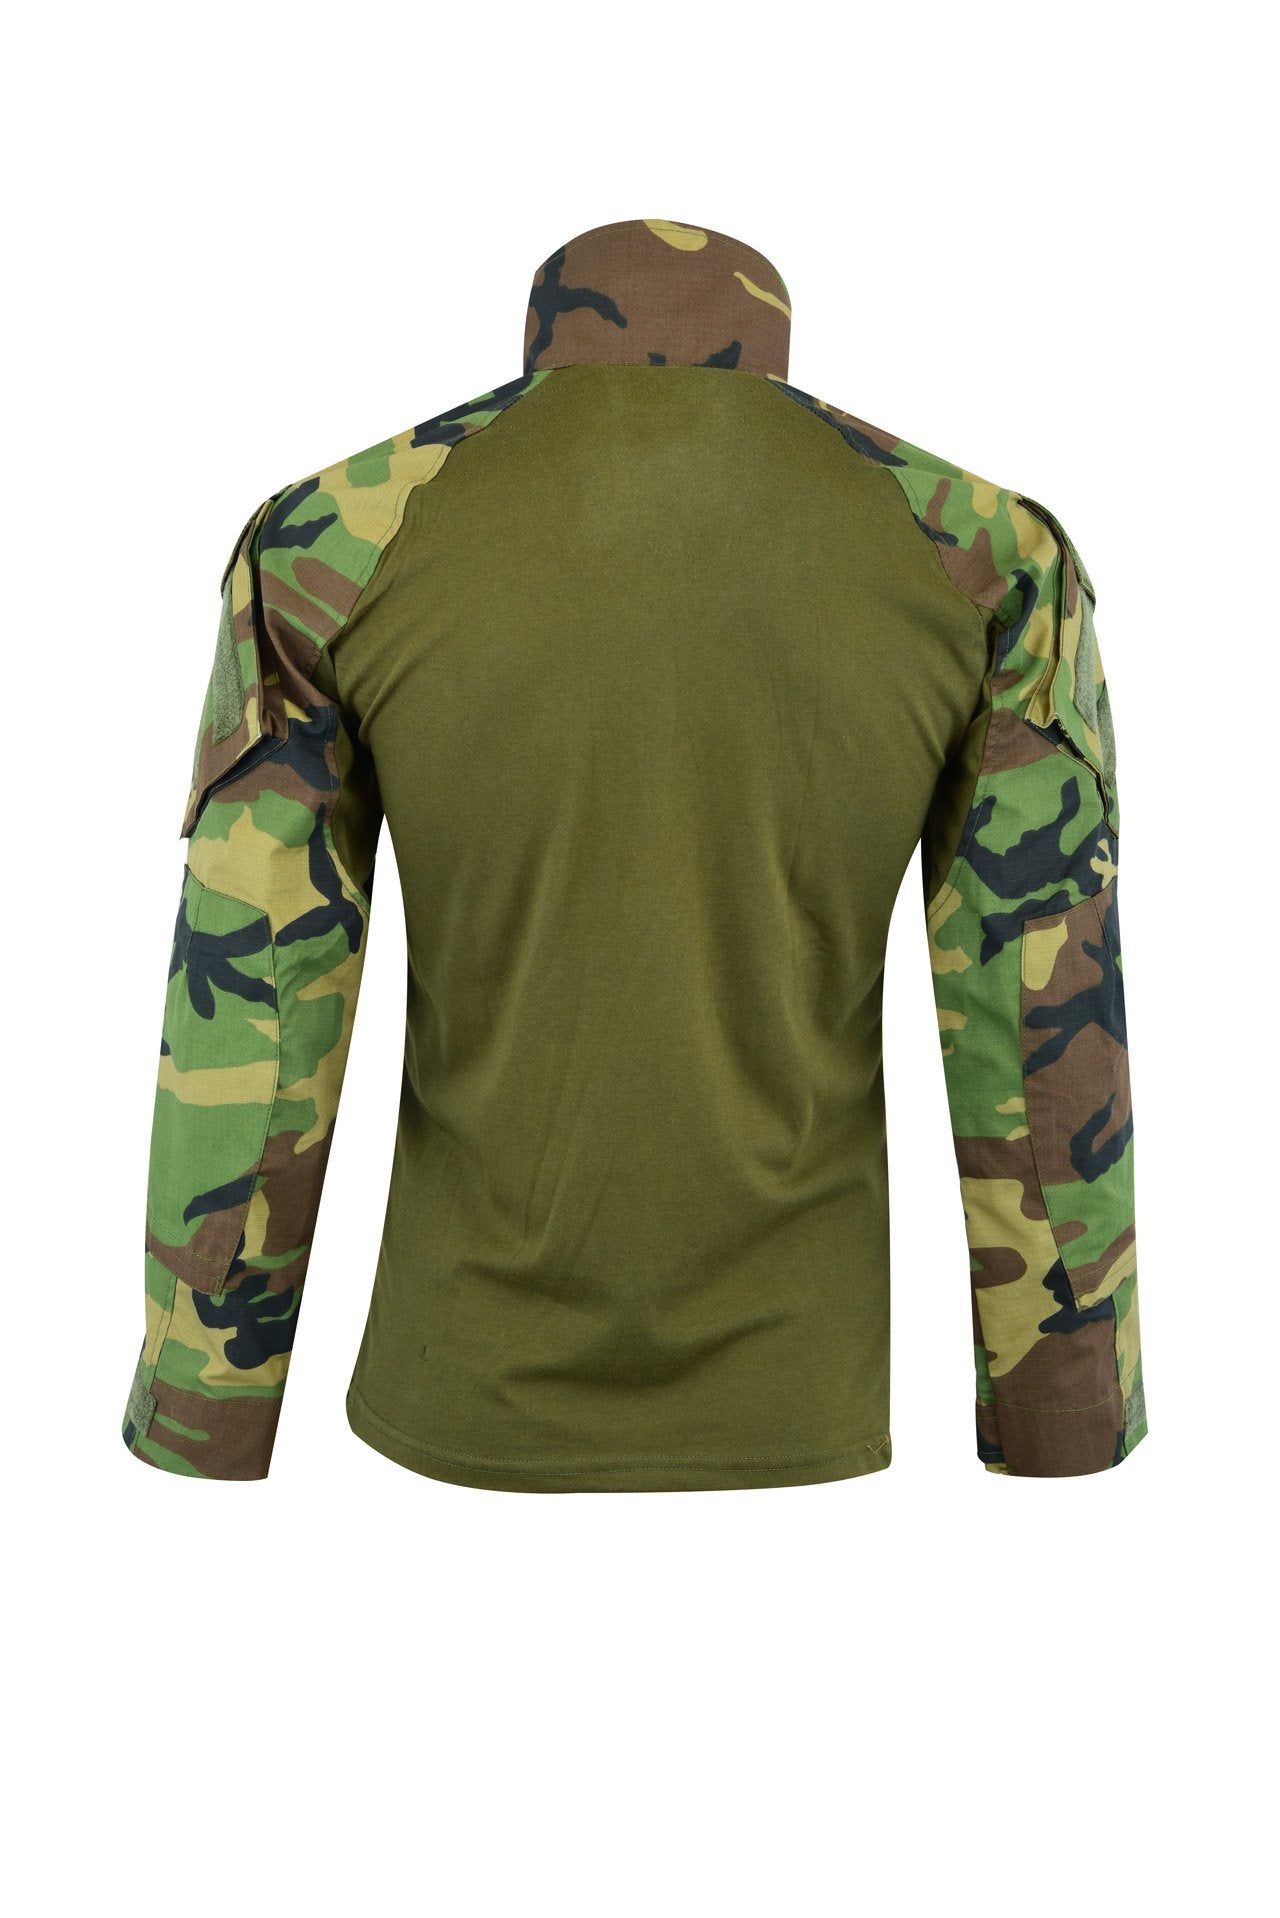 Tactical Zone HYBRID TACTICAL SHIRT IS A PERFECT COMBAT SHIRT Colour  Woodland Camo Back